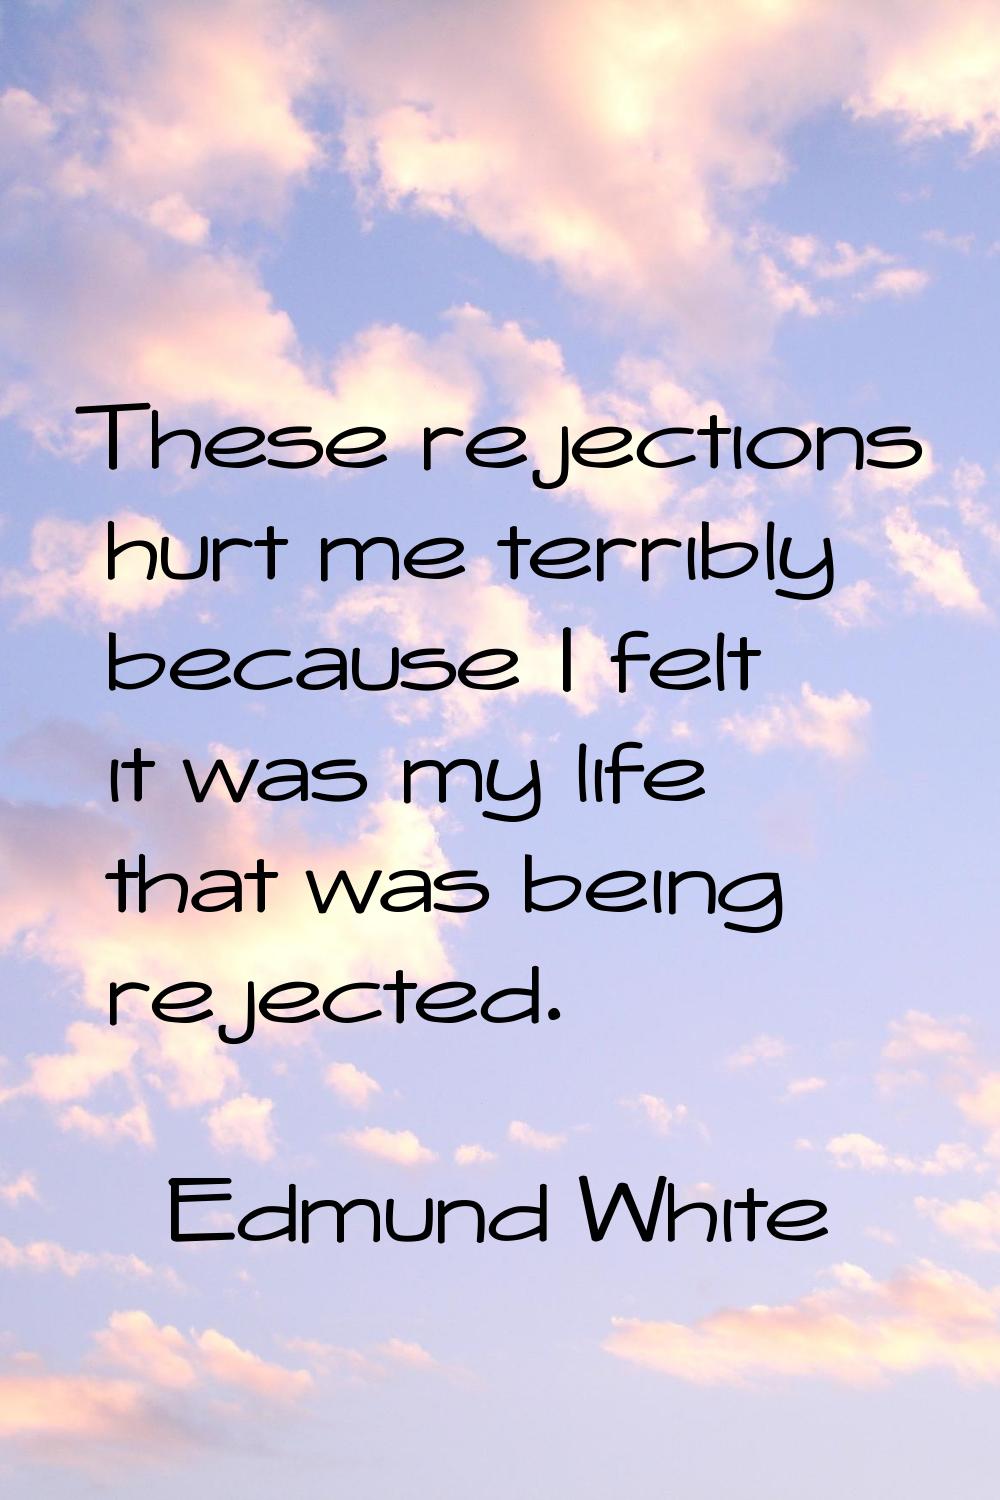 These rejections hurt me terribly because I felt it was my life that was being rejected.